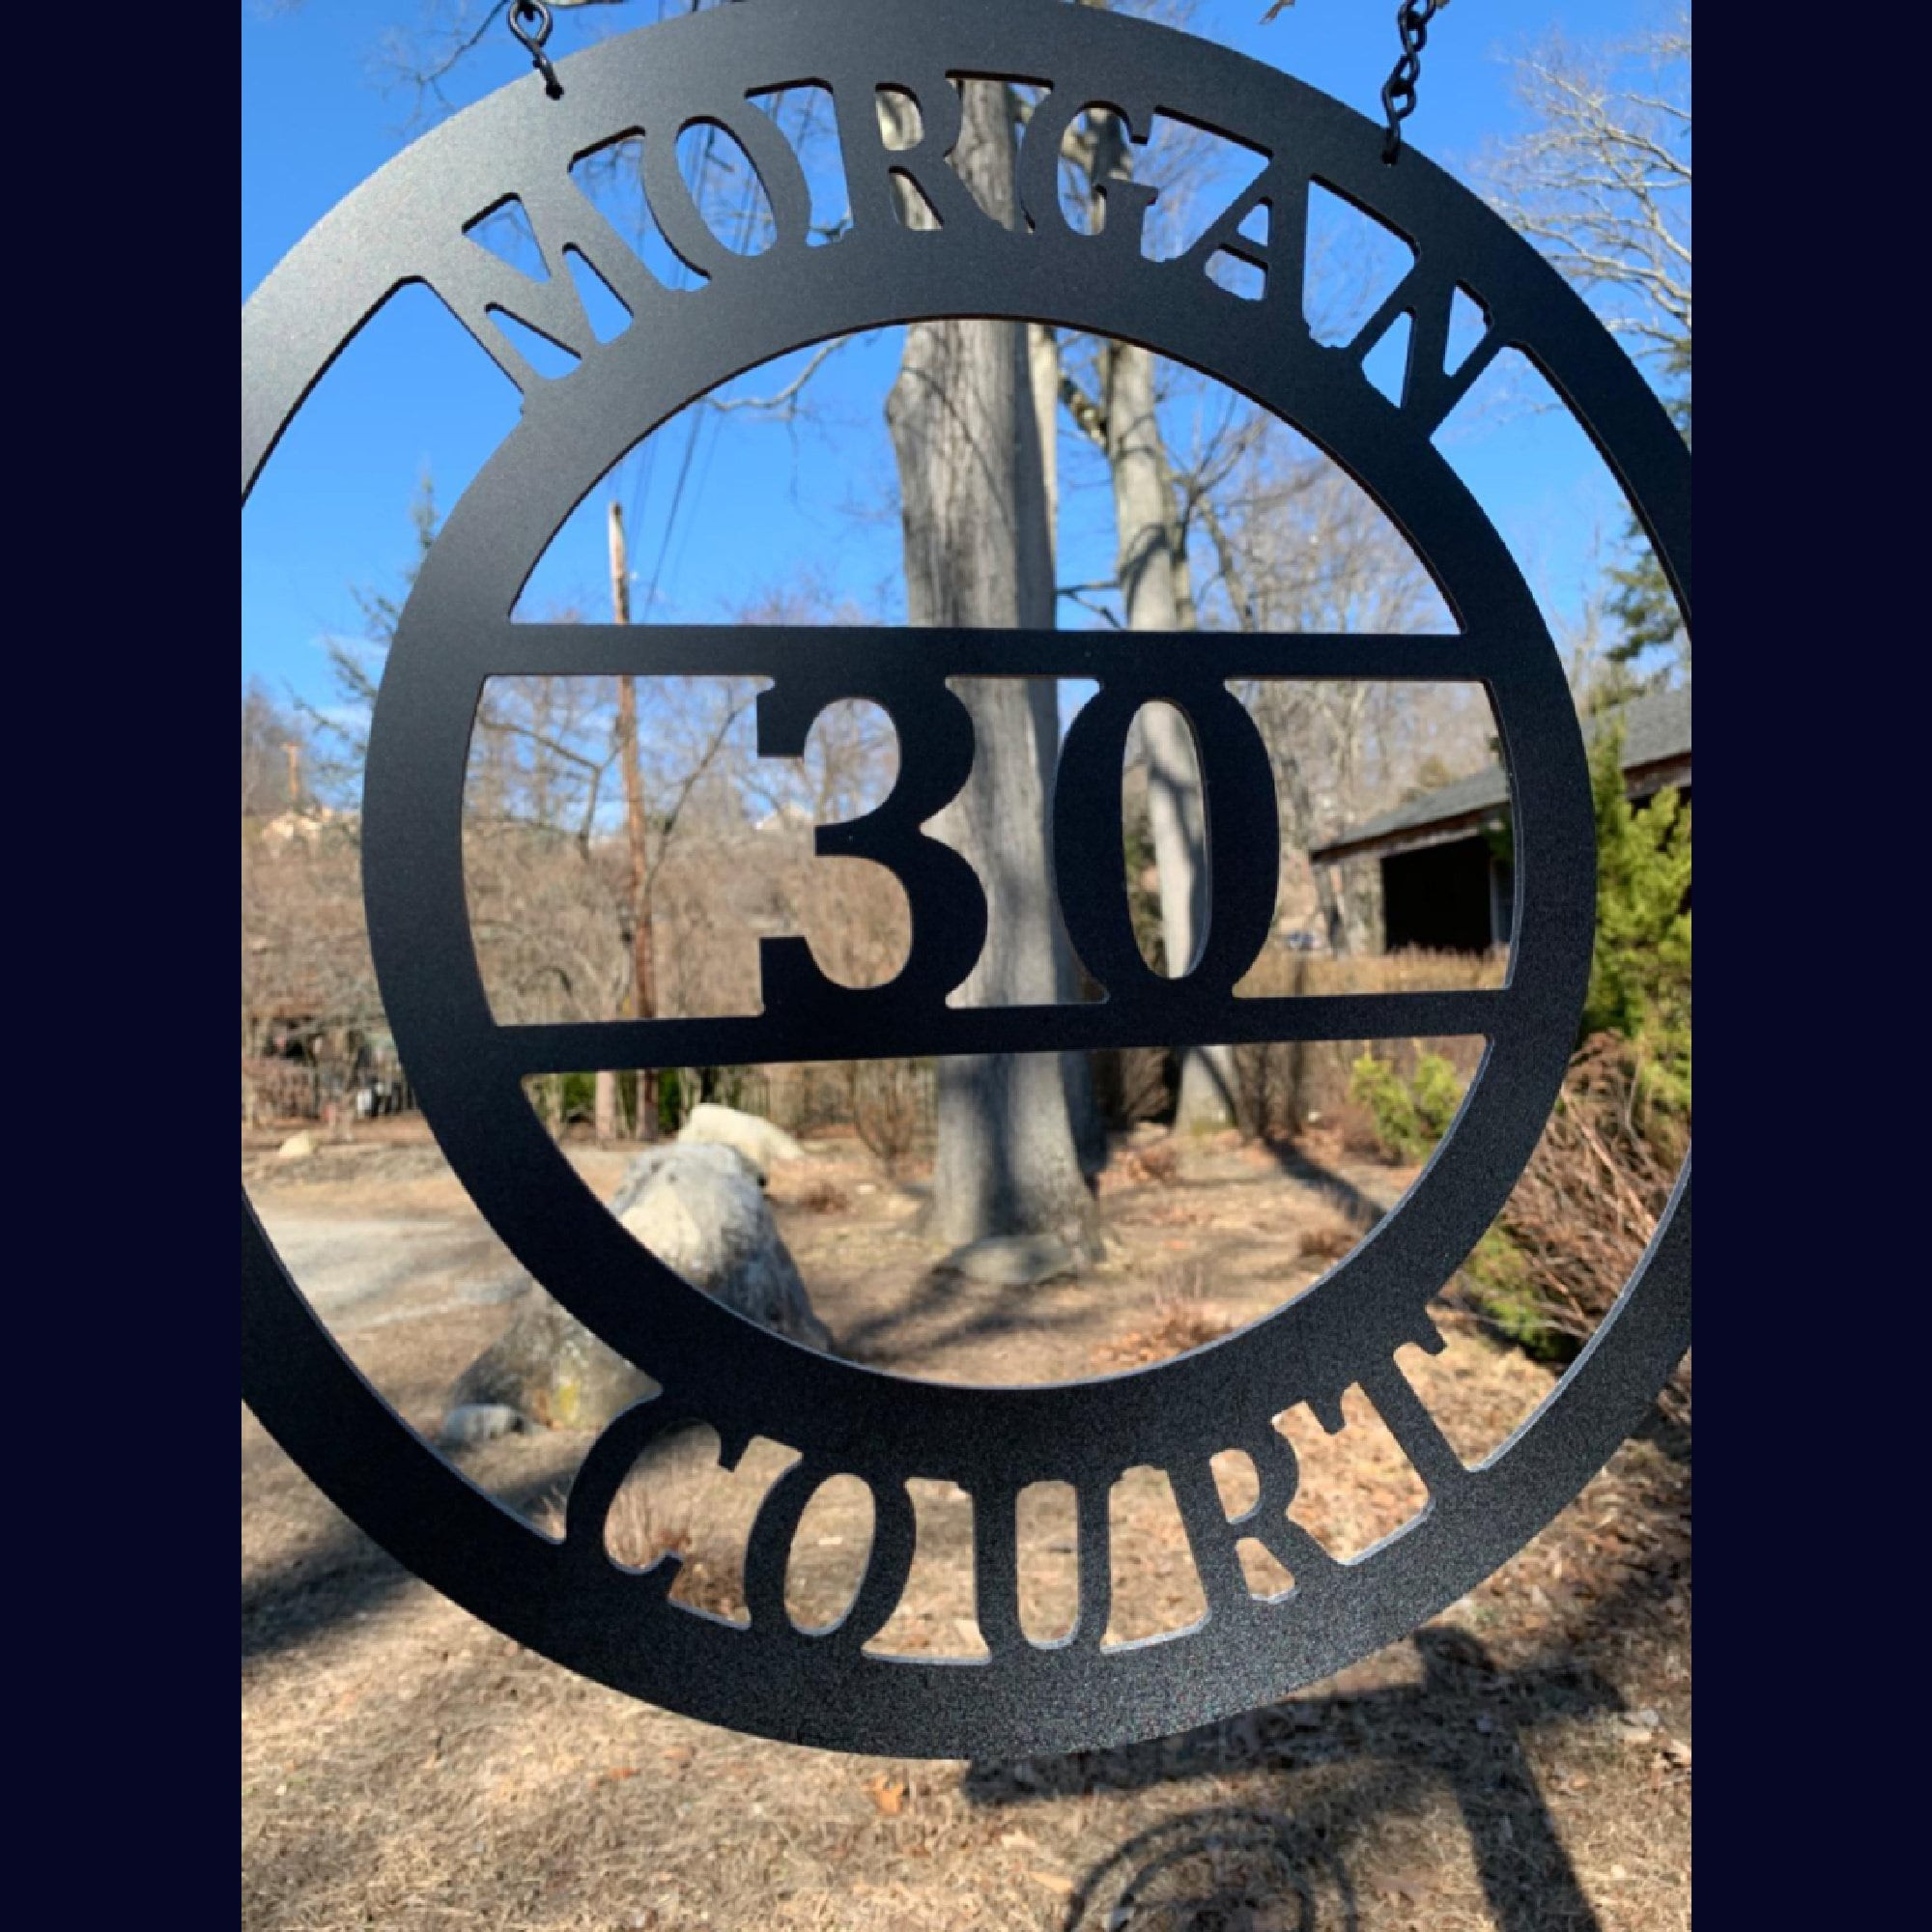 House Address Plaque W, Street Name, Personalized Lamp Post Street Number Sign, Mother's Day Garden, Yard Address Decor Sign Laser Cut Metal Signs Custom Gift Ideas 24x24IN